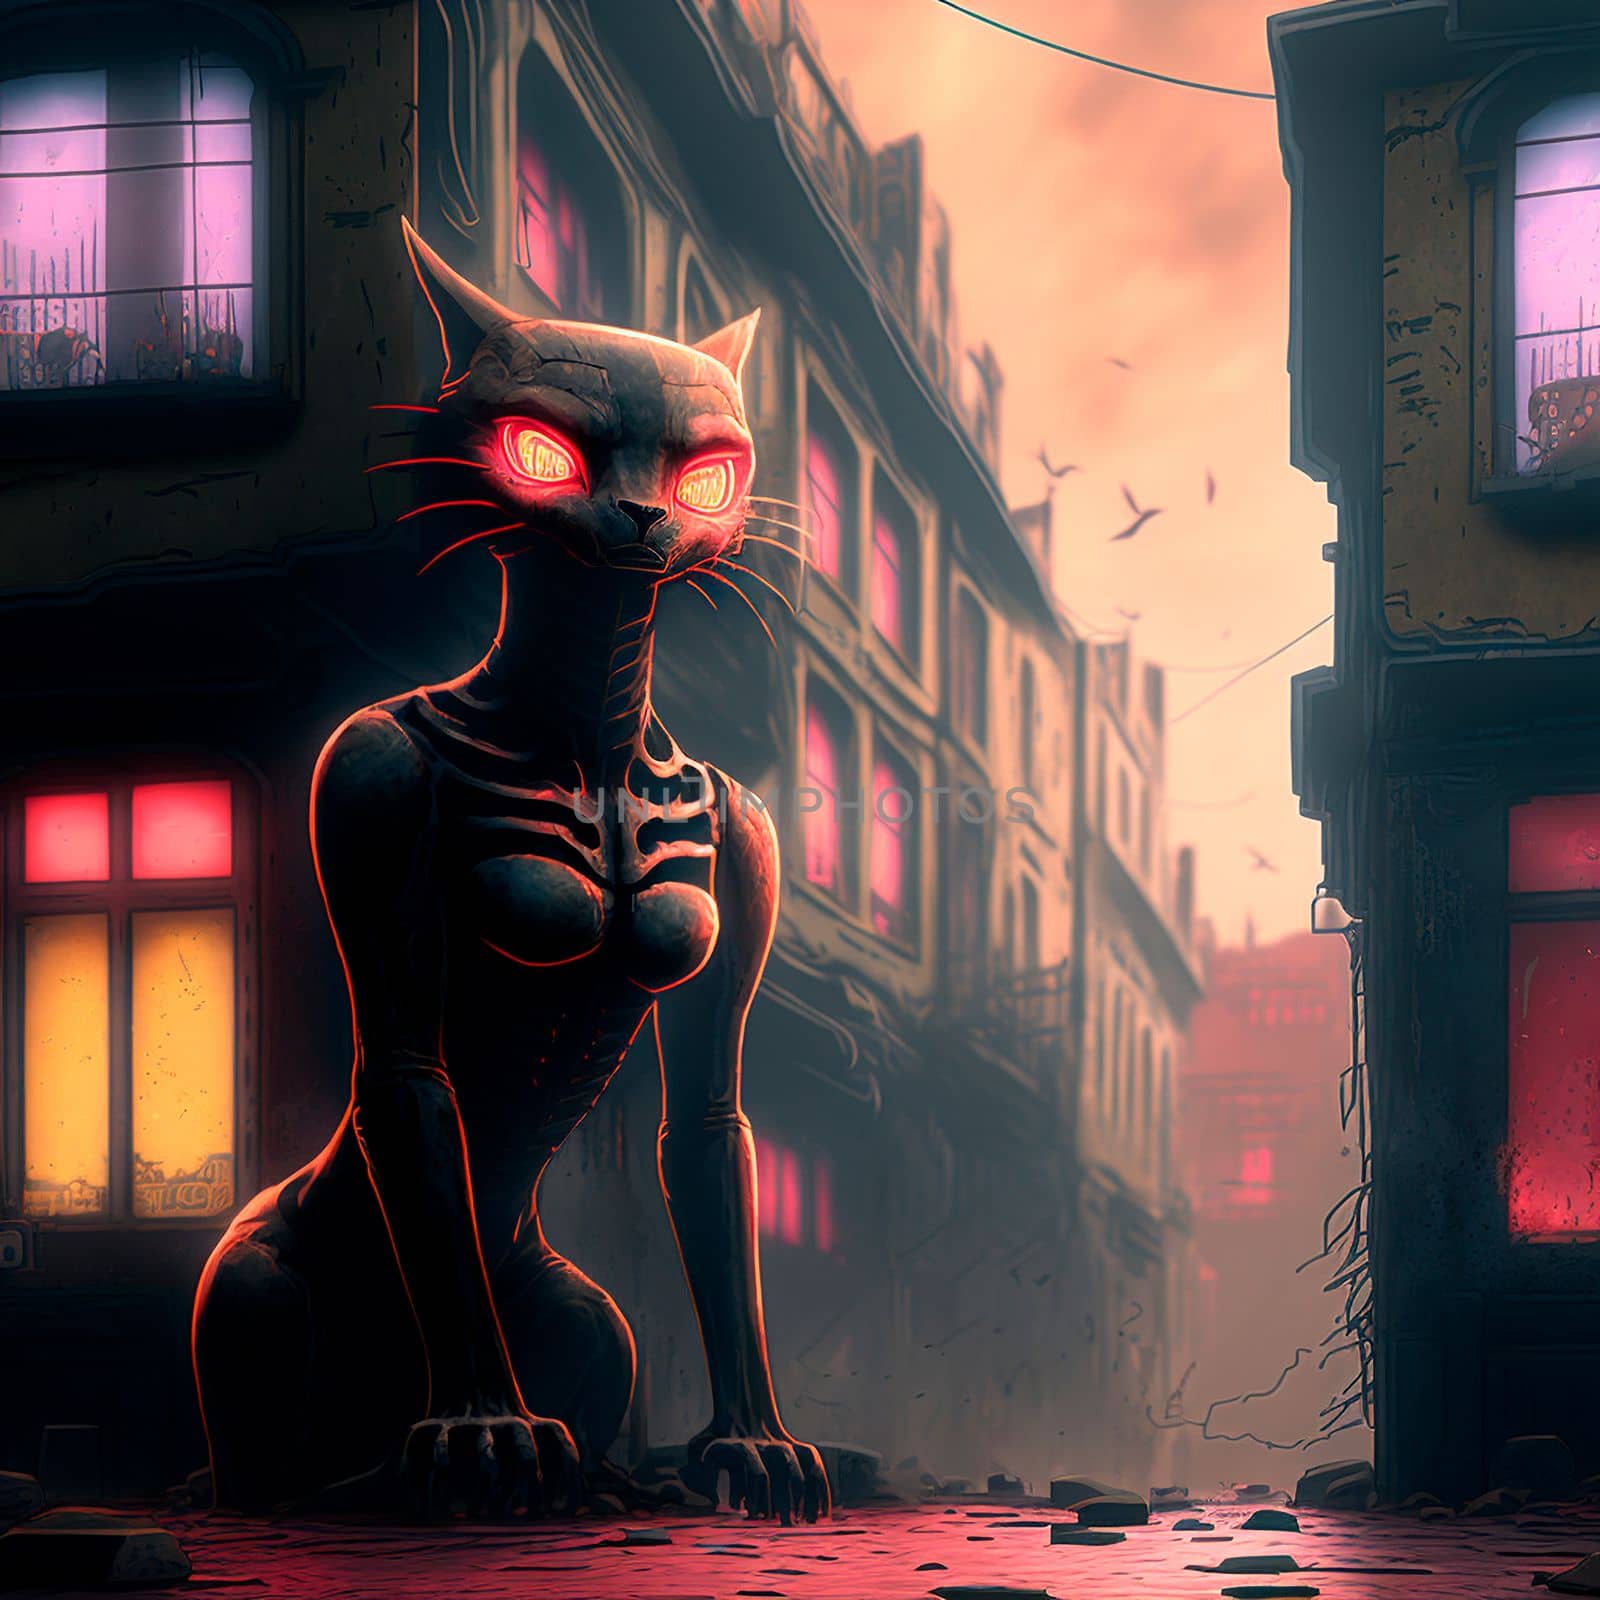 Catwoman on the street of a mysterious city by NeuroSky